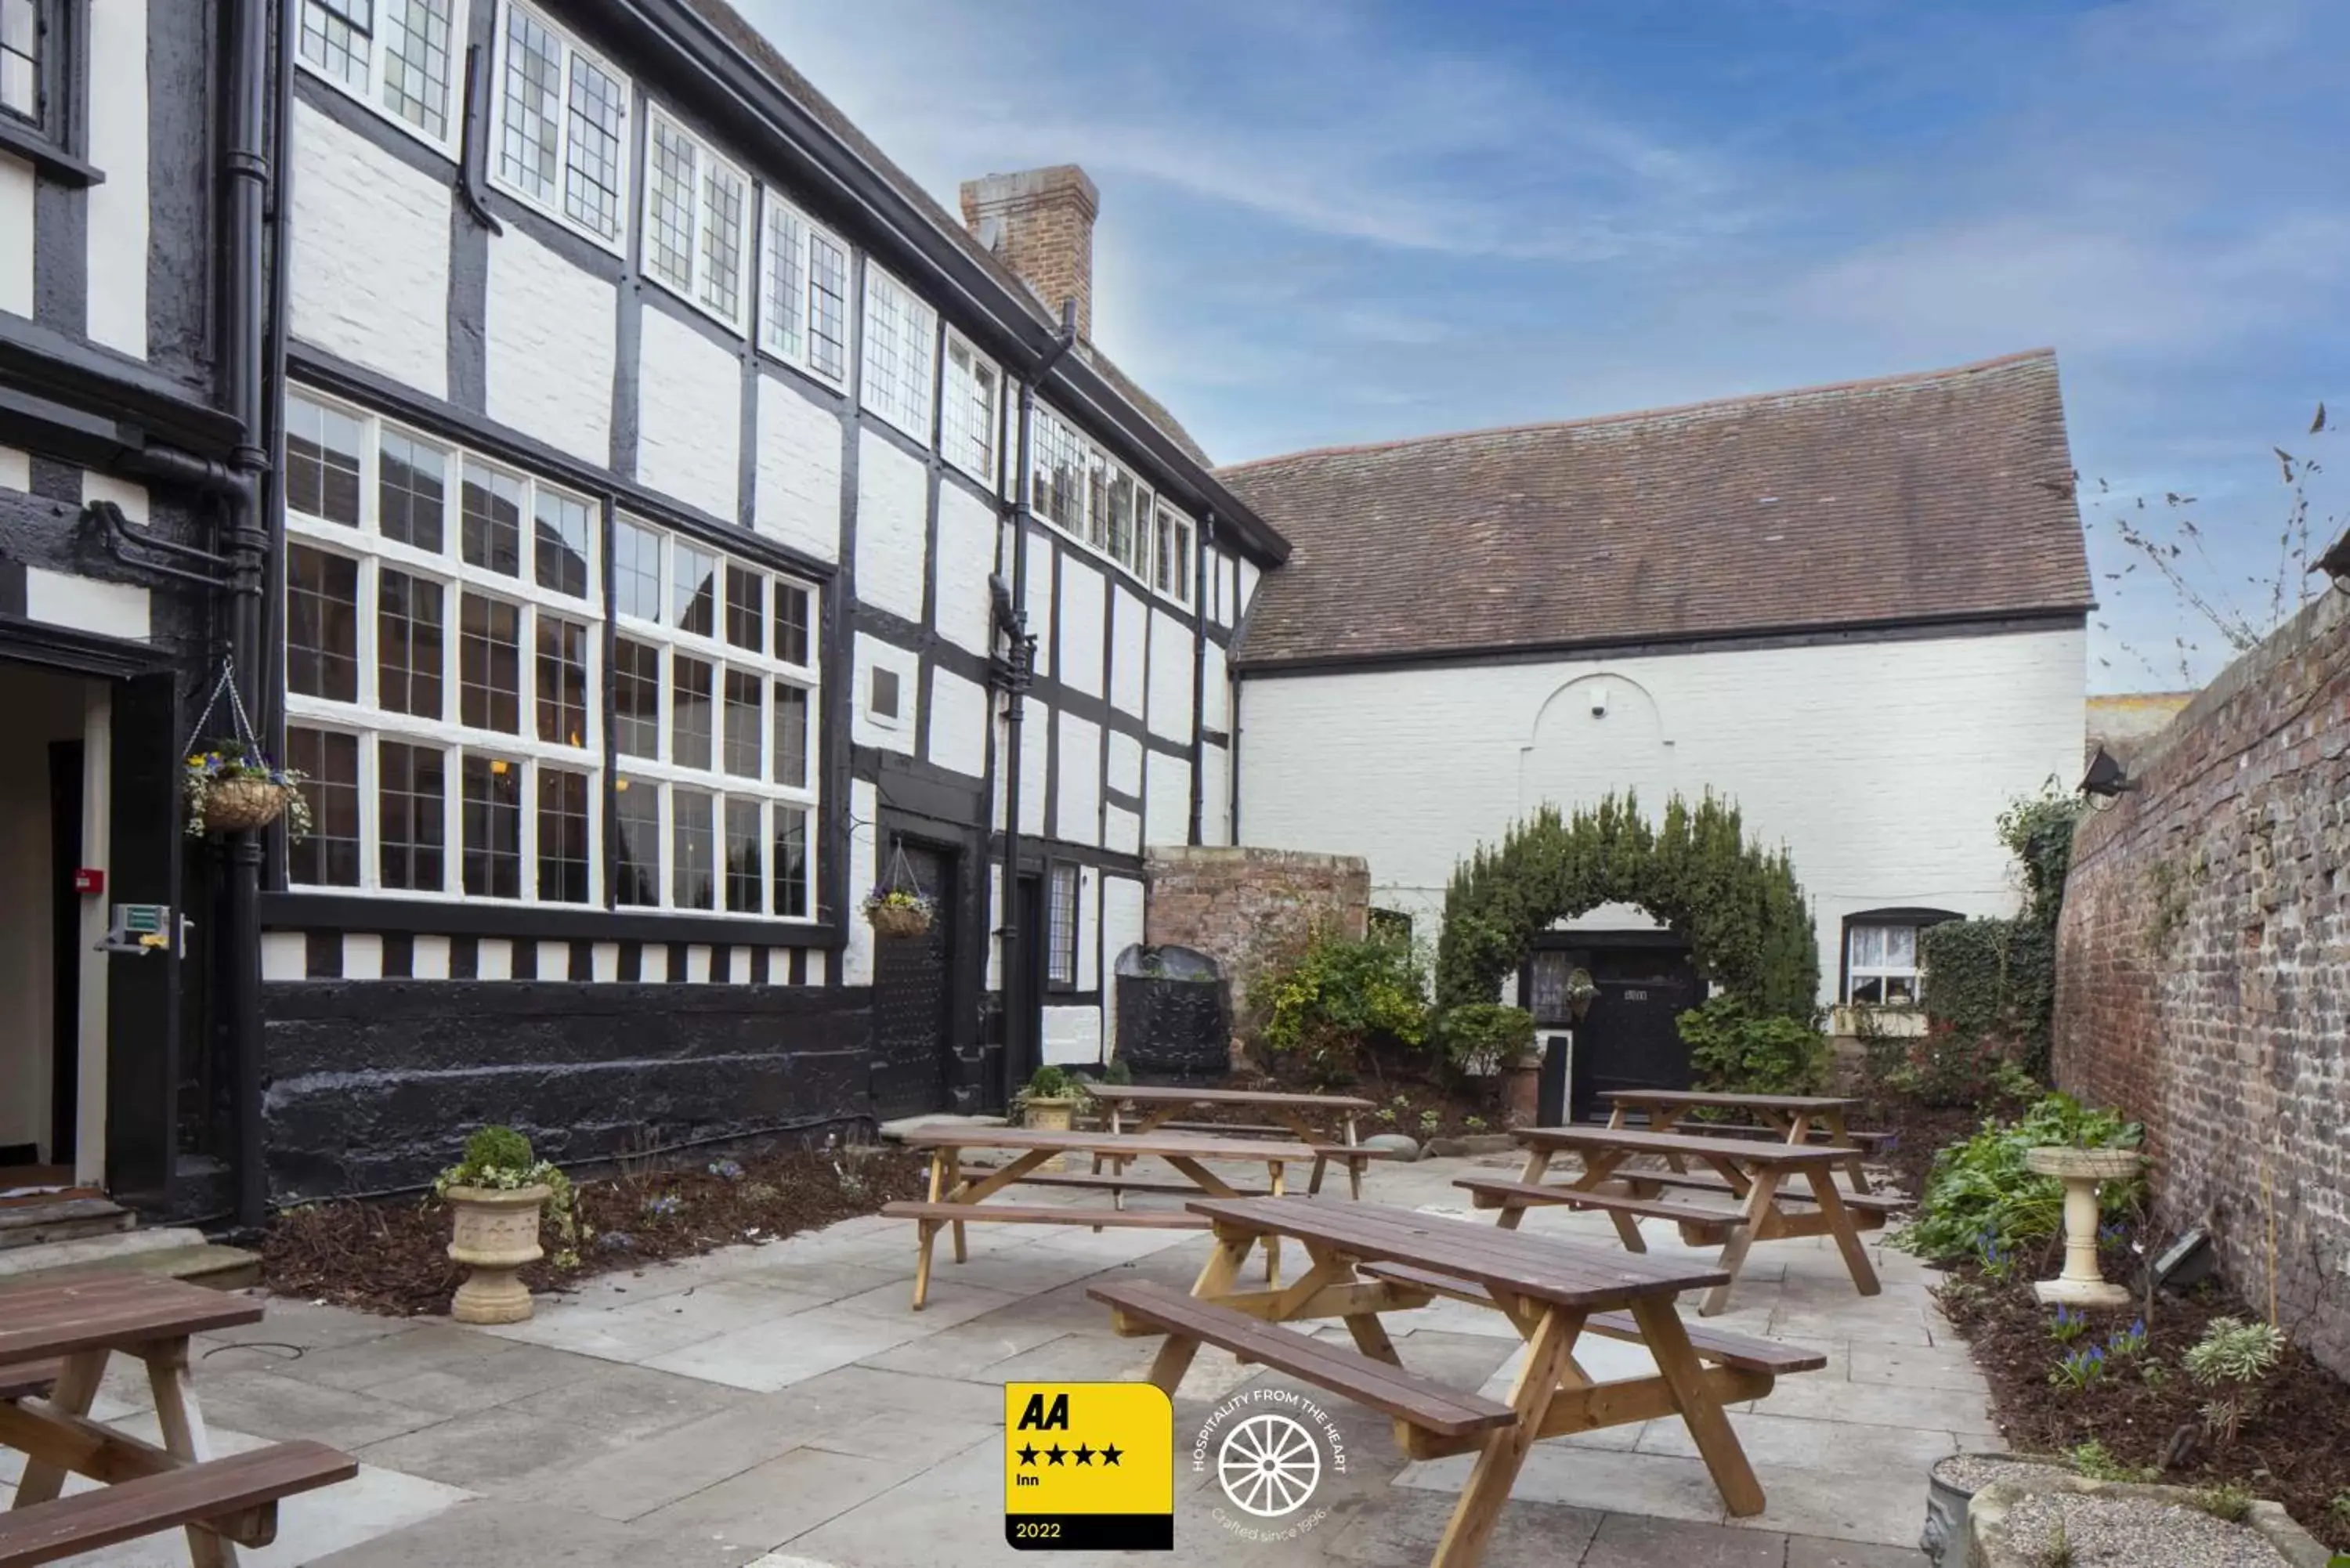 Property Building in The Tudor House Hotel, Tewkesbury, Gloucestershire